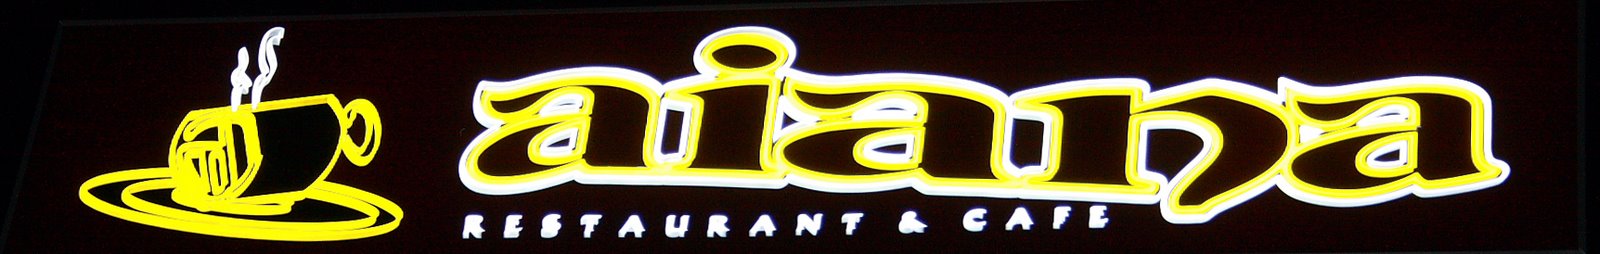 Aiana Restaurant & Cafe, for ALL to dine in...